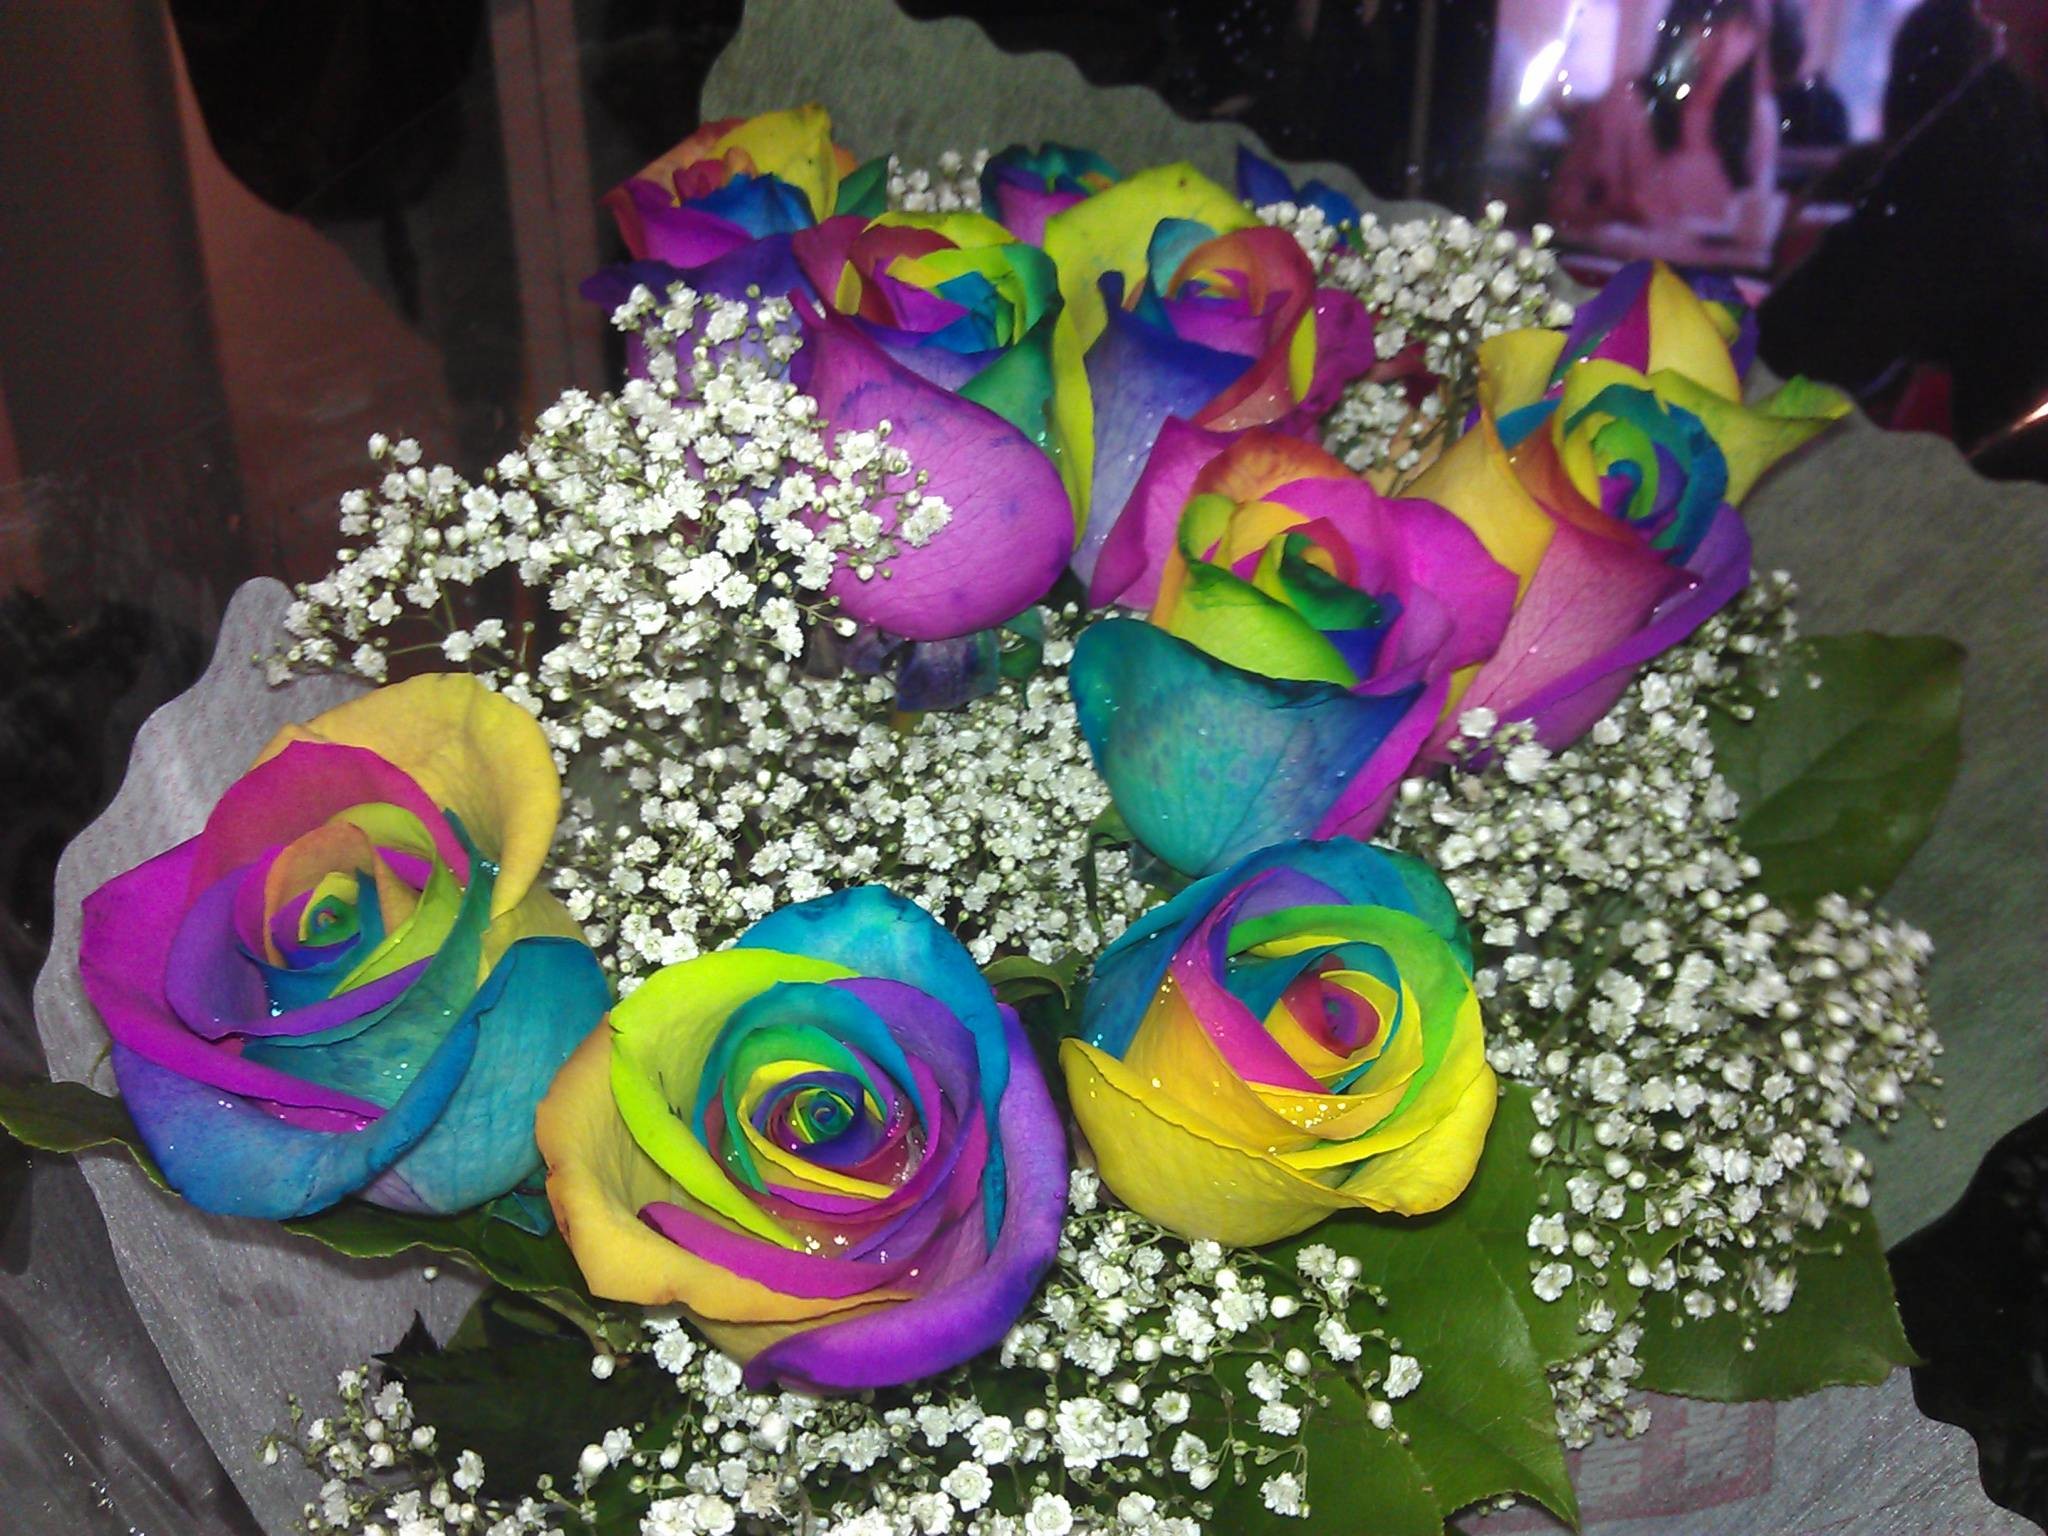 Today I learned that rainbow roses exist, and that they are amazing